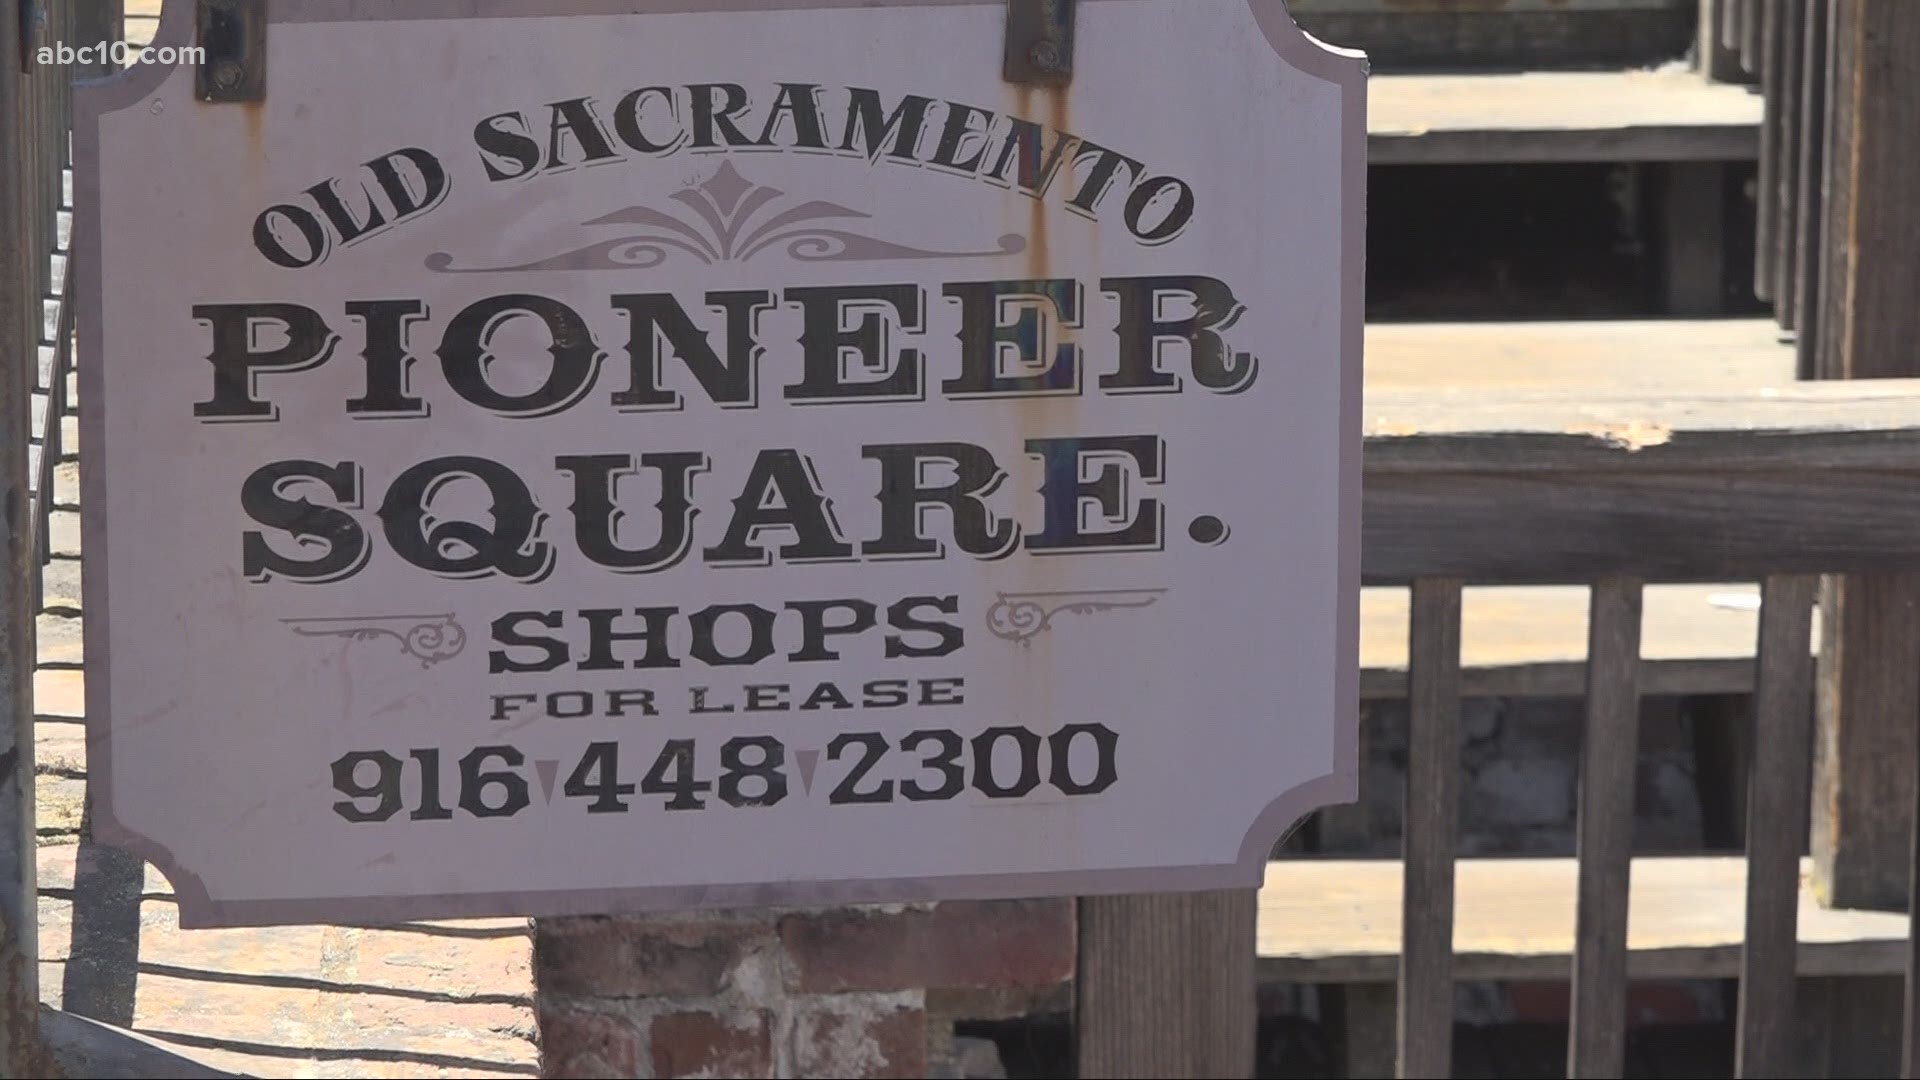 Black-owned businesses are celebrating Juneteenth in Old Sacramento, recognizing the history of the area.